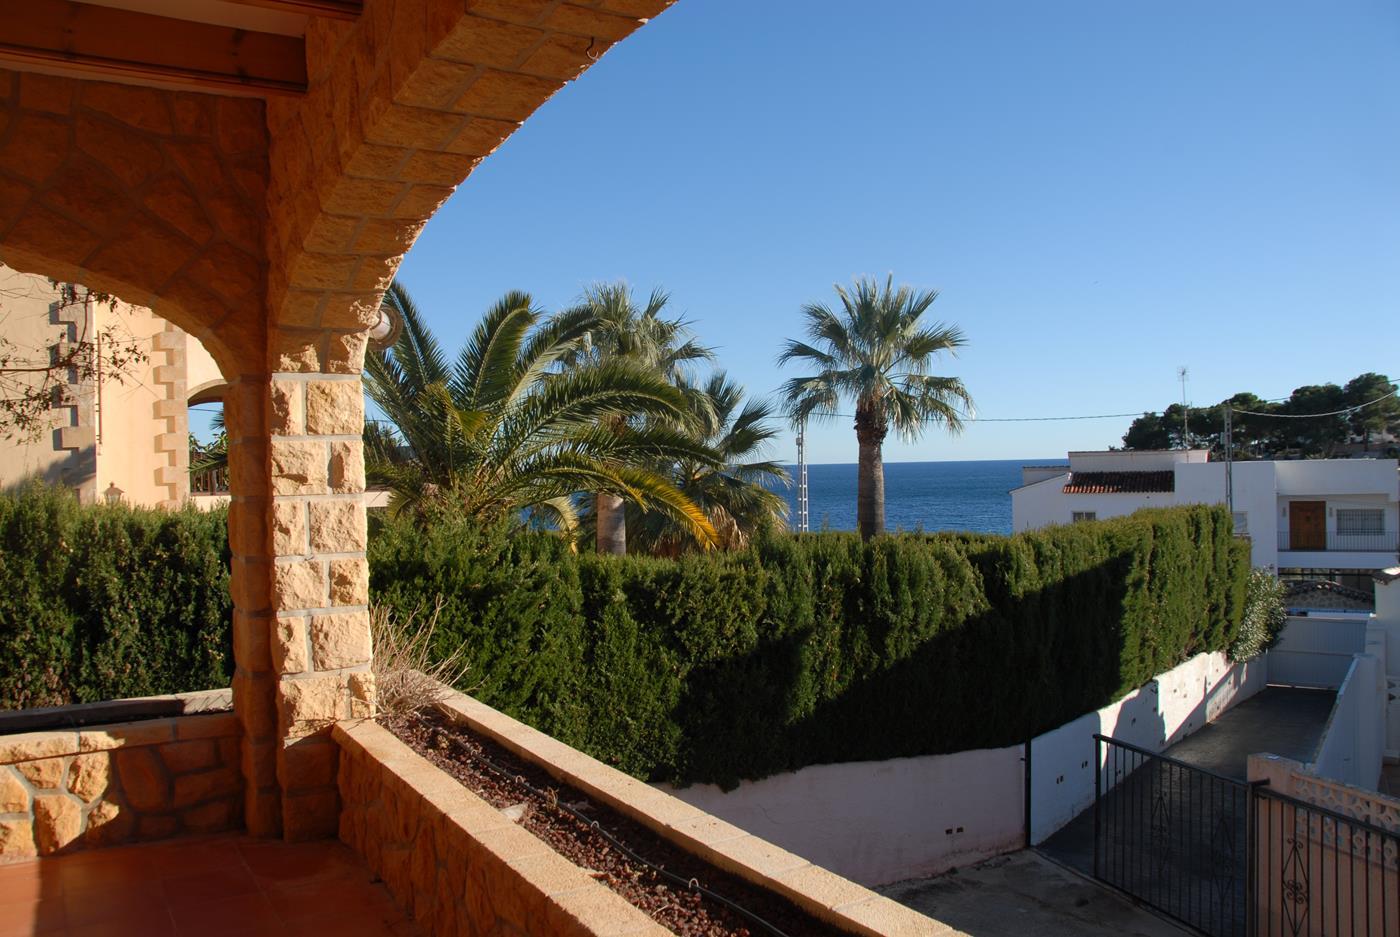 Villa for 10 people 200 meters from the beach of Fustera